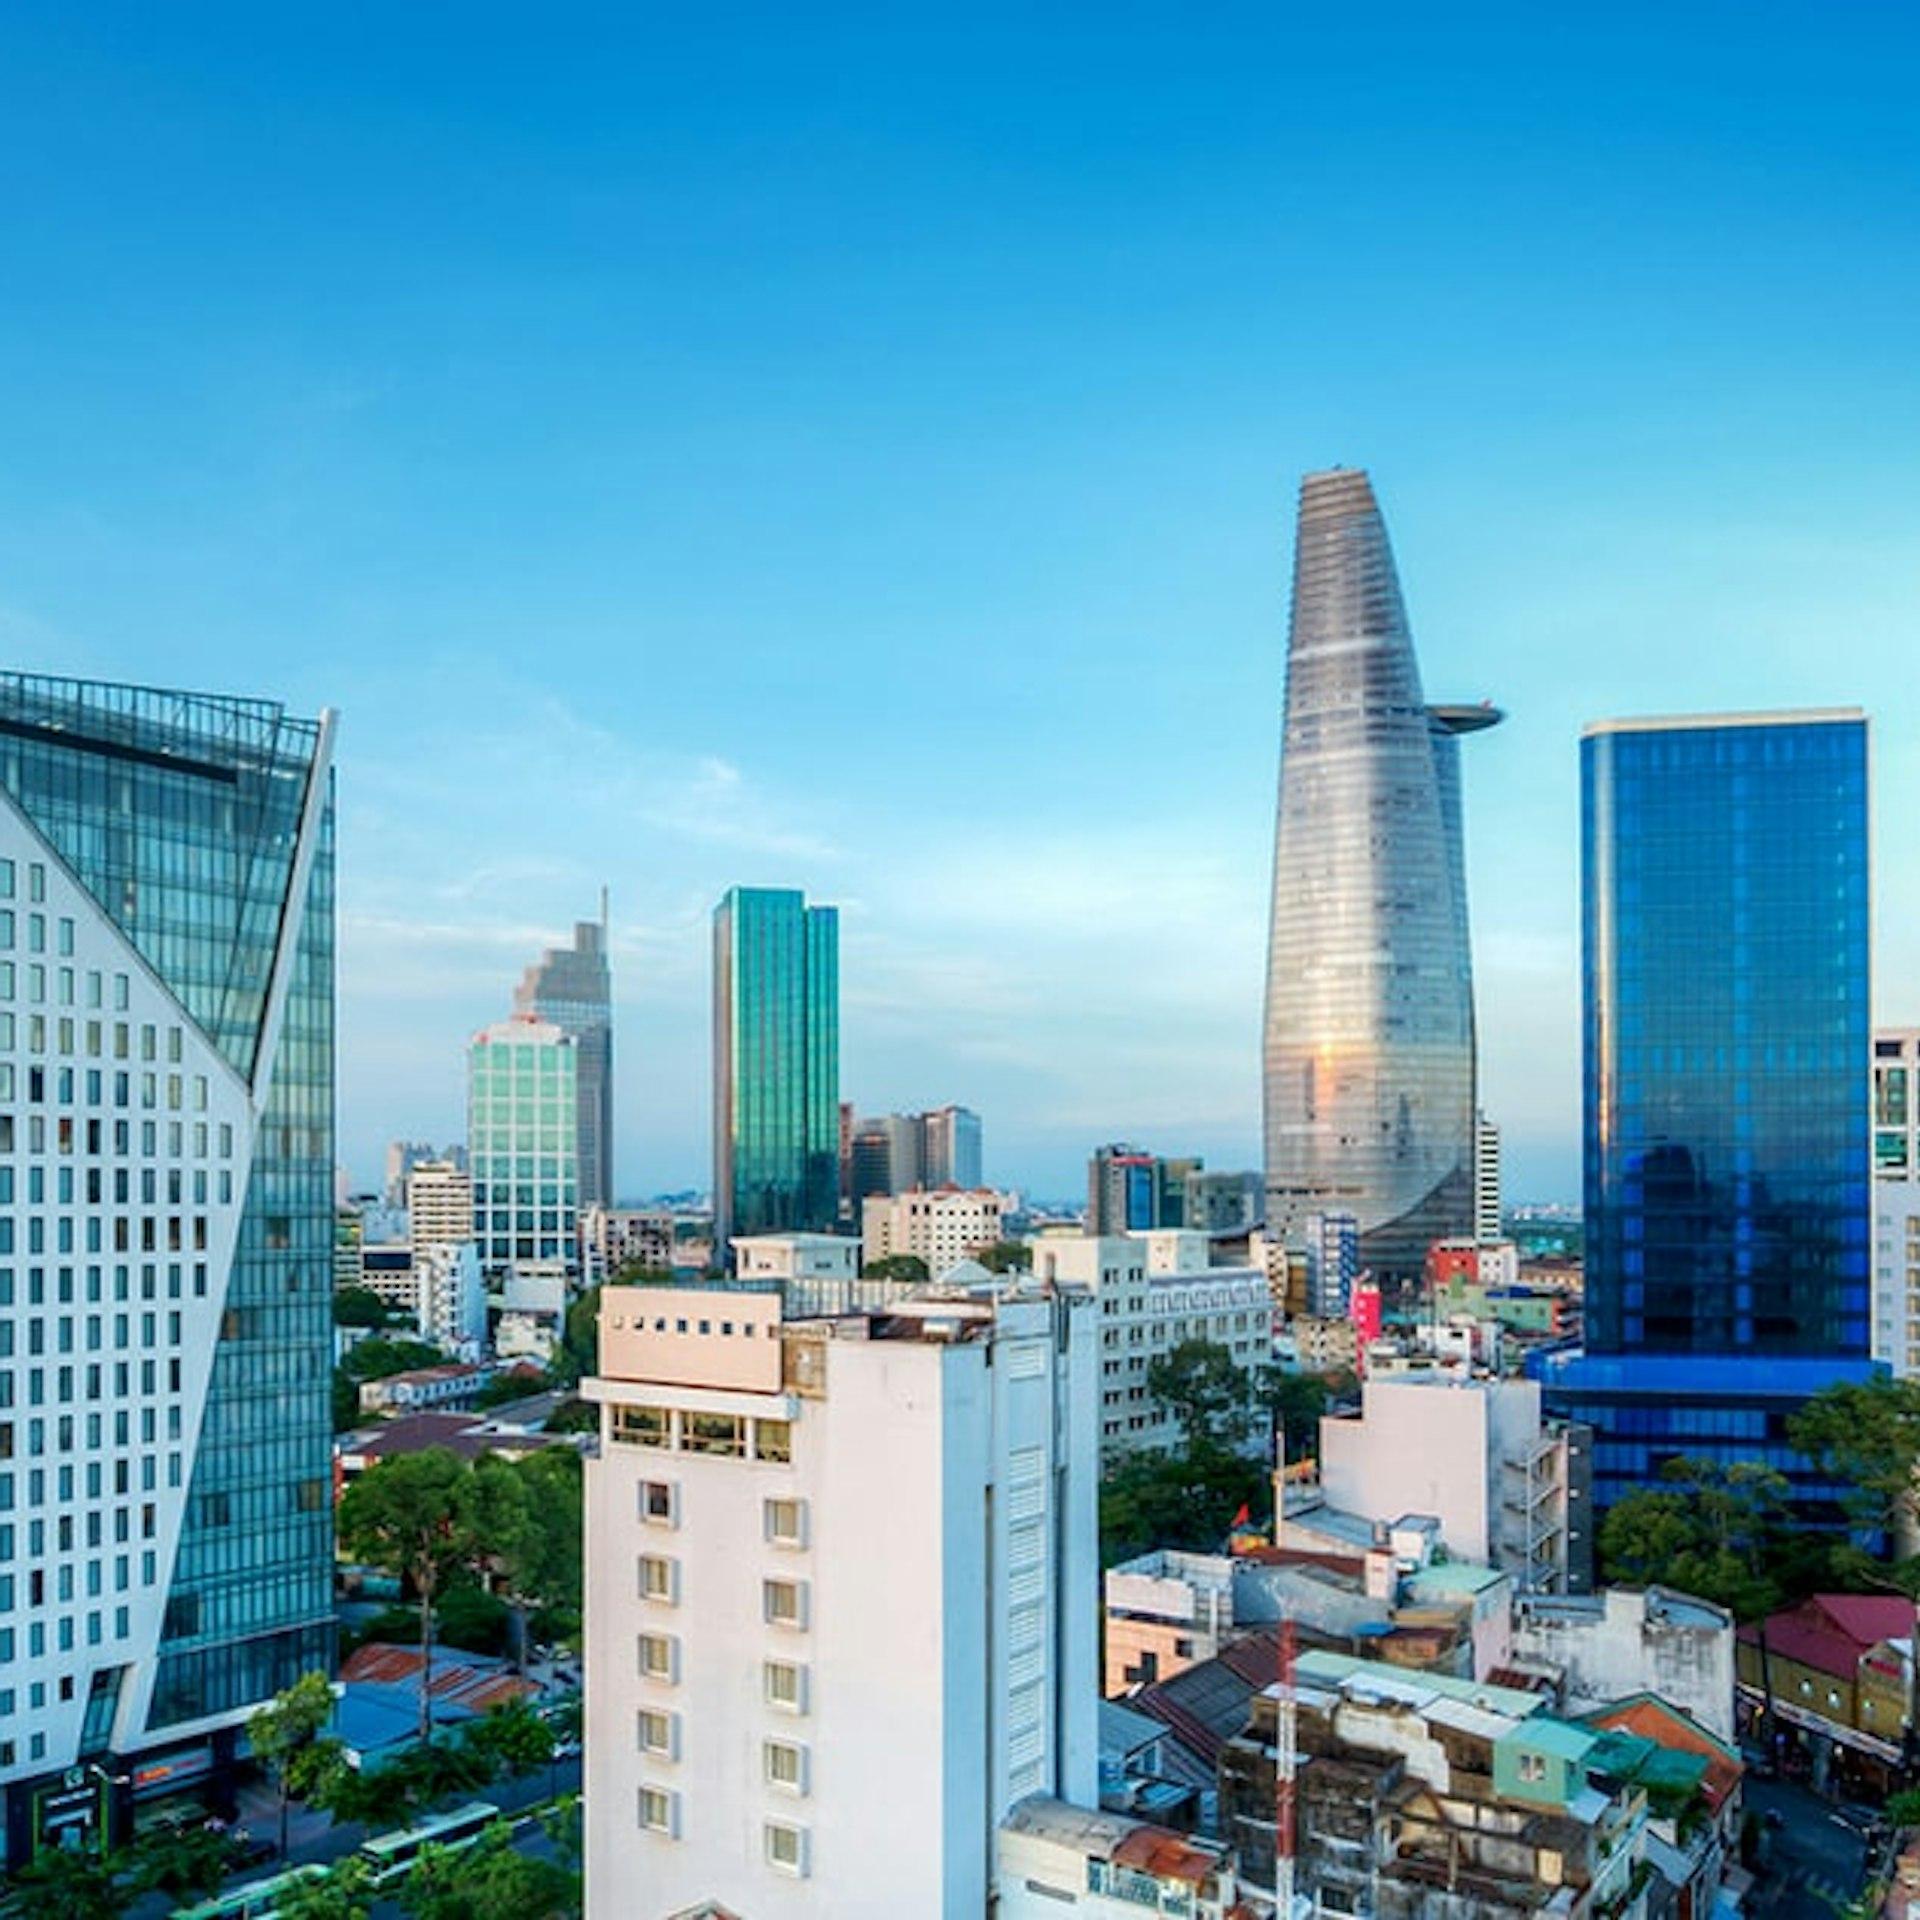 Get the latest news and updates on e-invoicing, e-ordering, e-archiving and indirect tax regulatory requirements for Vietnam.